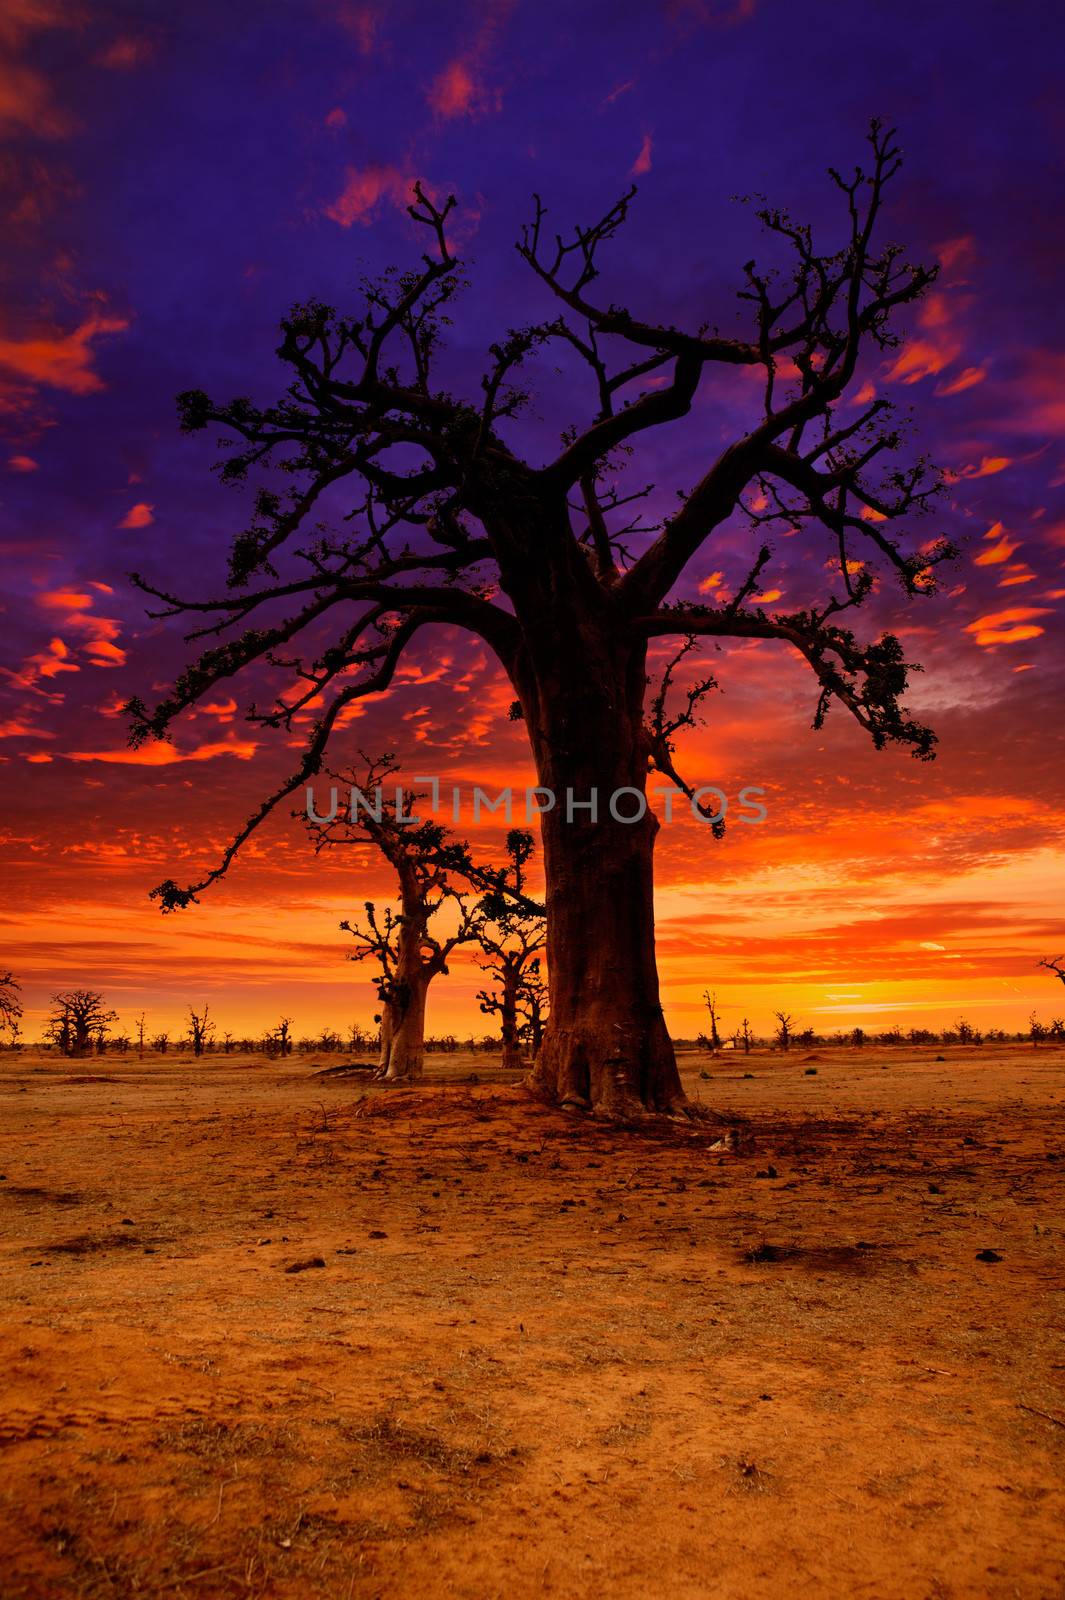 Africa sunset in Baobab trees colorful sky